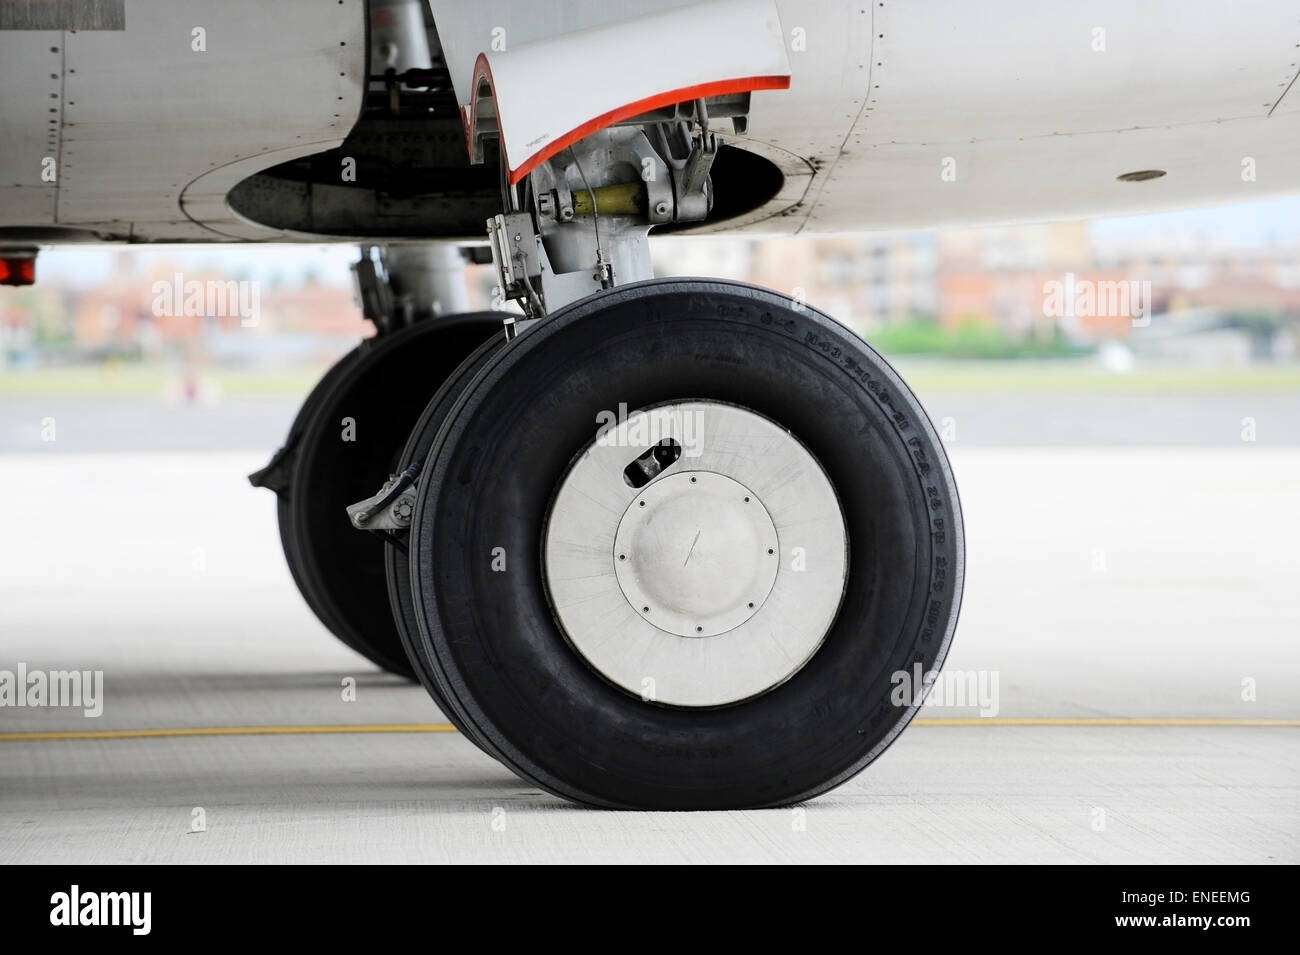 Detail shot with big airplane wheels and landing gear Stock Photo